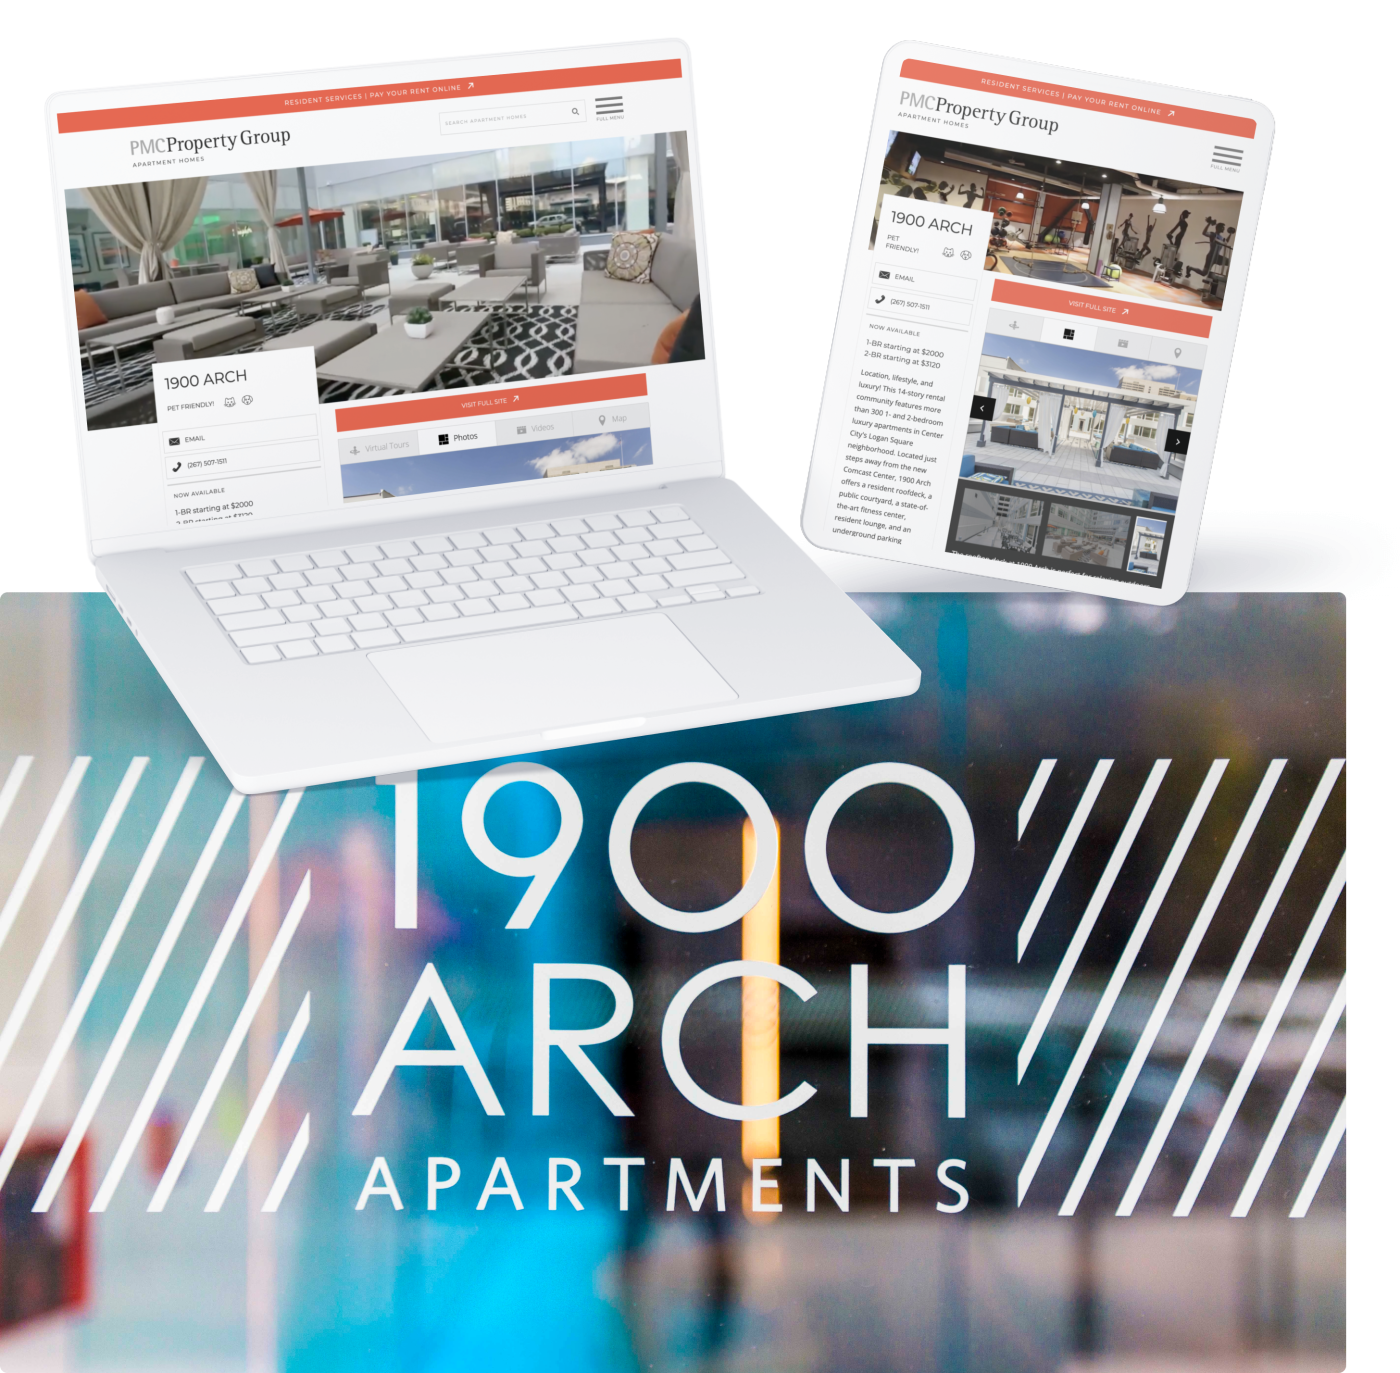 A laptop and tablet display their homepage redesign in front of the 1900 Arch Apartments' logo printed on their building.